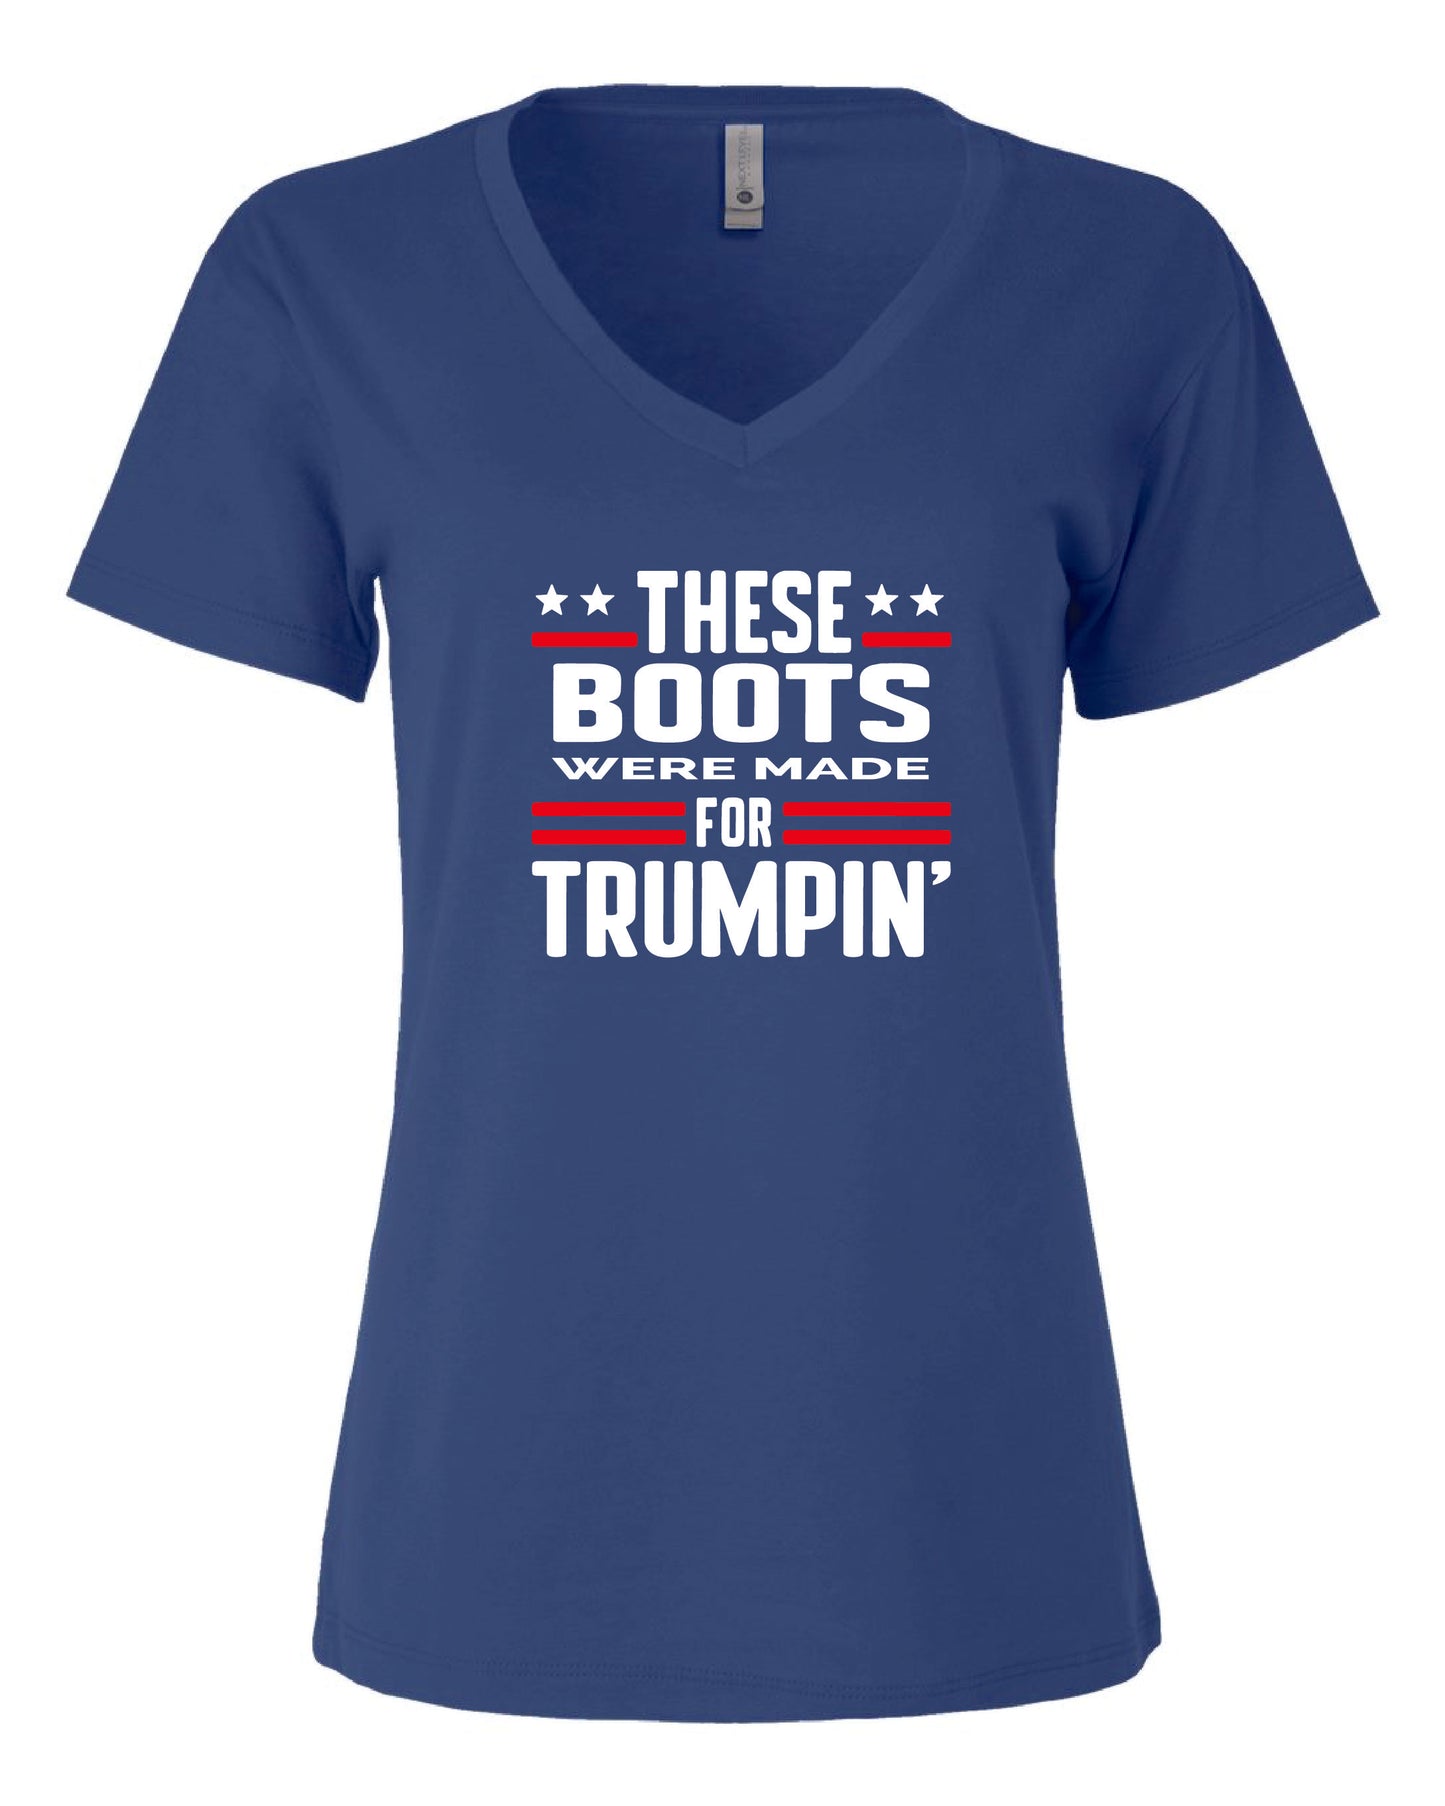 "These Boots" Women's V-Neck Graphic T-shirt - Royal Blue